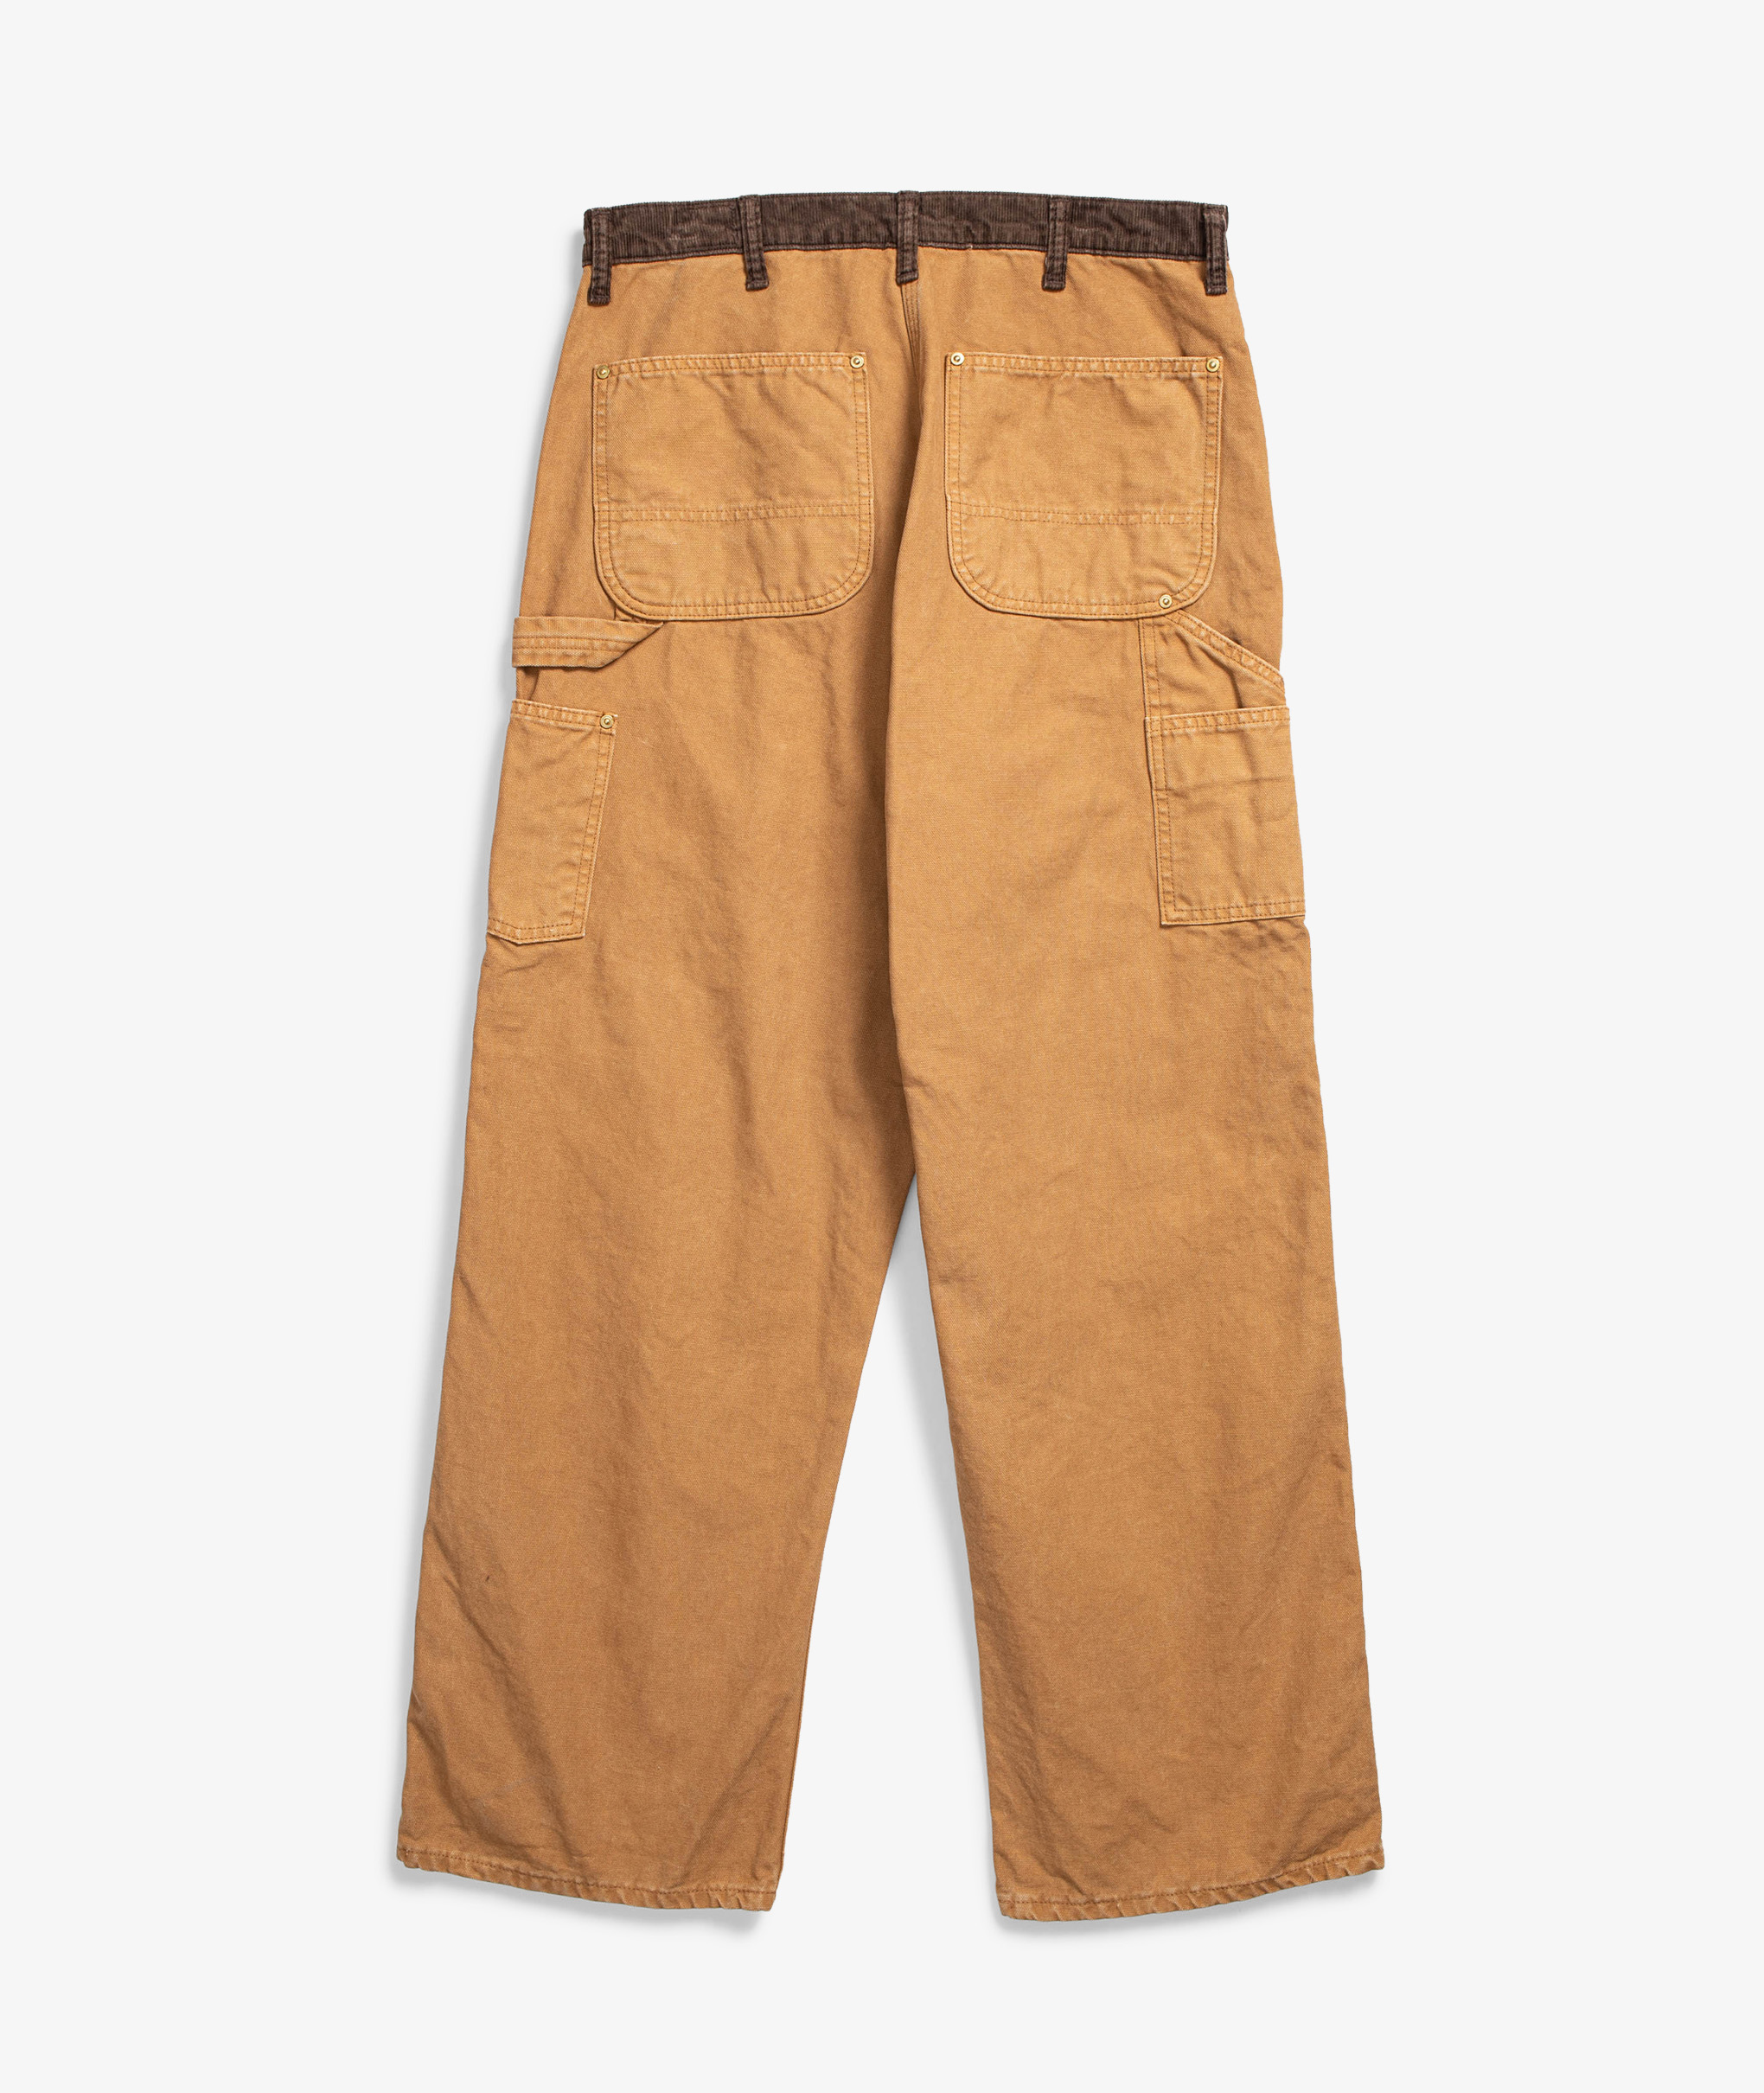 Norse Store  Shipping Worldwide - orSlow Two Tone Oxford Painter Pants -  Brown